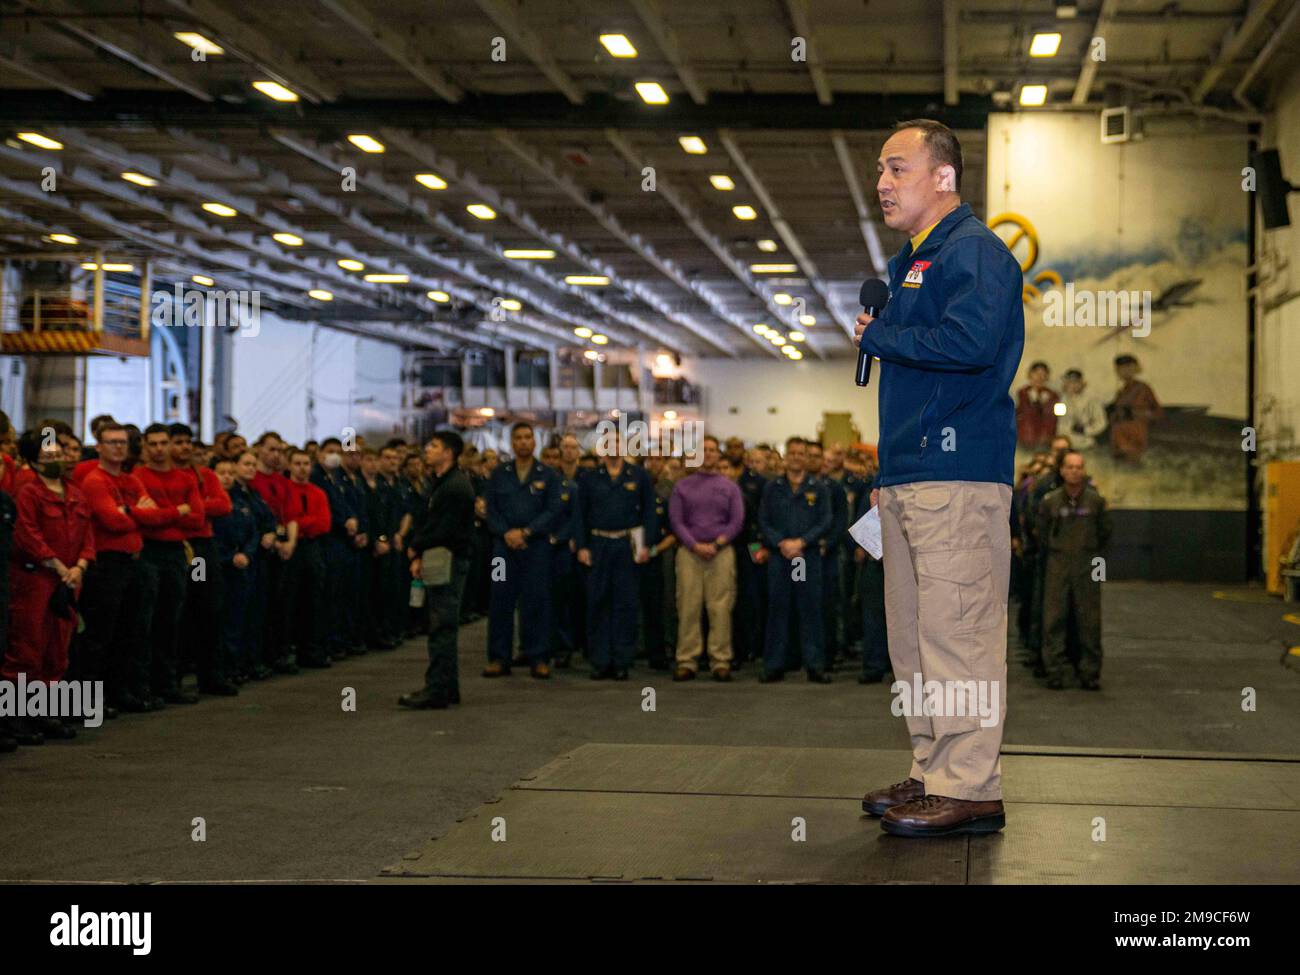 220516-N-DW158-1031 PACIFIC OCEAN (May 16, 2022) Capt. Fred Goldhammer, commanding officer of the U.S. Navy’s only forward-deployed aircraft carrier USS Ronald Reagan (CVN 76), speaks to Sailors during an all-hands call in the hangar bay. Ronald Reagan’s command team conducts all-hands calls to announce upcoming events, schedule changes, or important public service announcements to the ship’s crew. Ronald Reagan, the flagship of Carrier Strike Group 5, provides a combat-ready force that protects and defends the United States, and supports alliances, partnerships and collective maritime interes Stock Photo